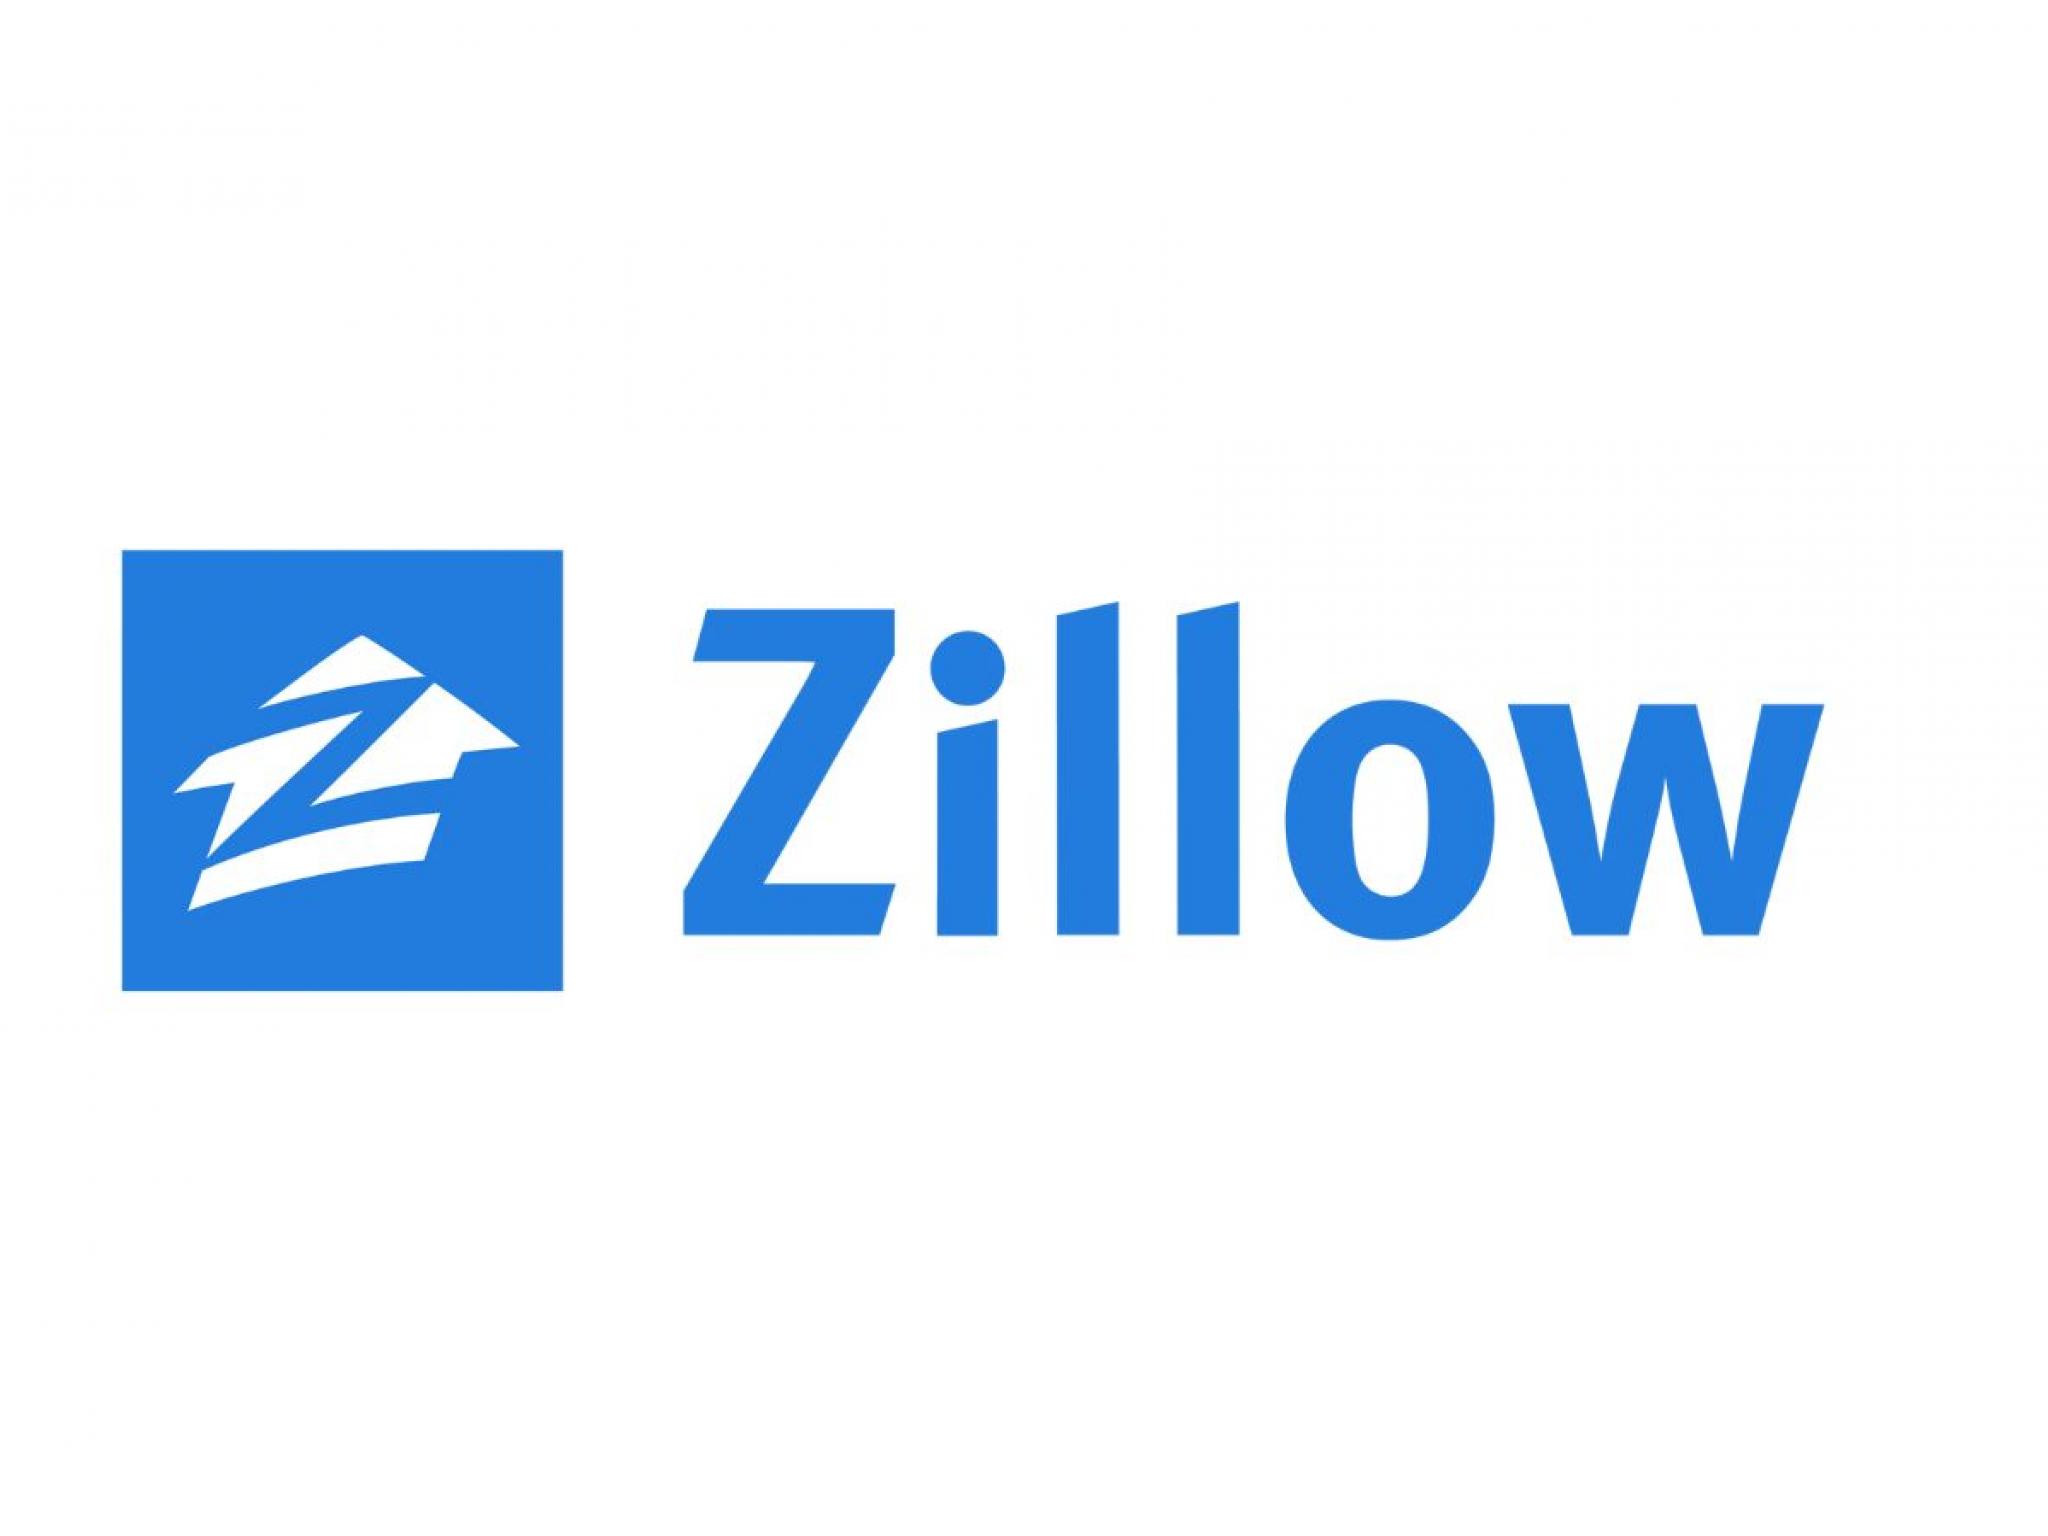  zillow-shopify-datadog-and-other-big-stocks-moving-higher-on-thursday 